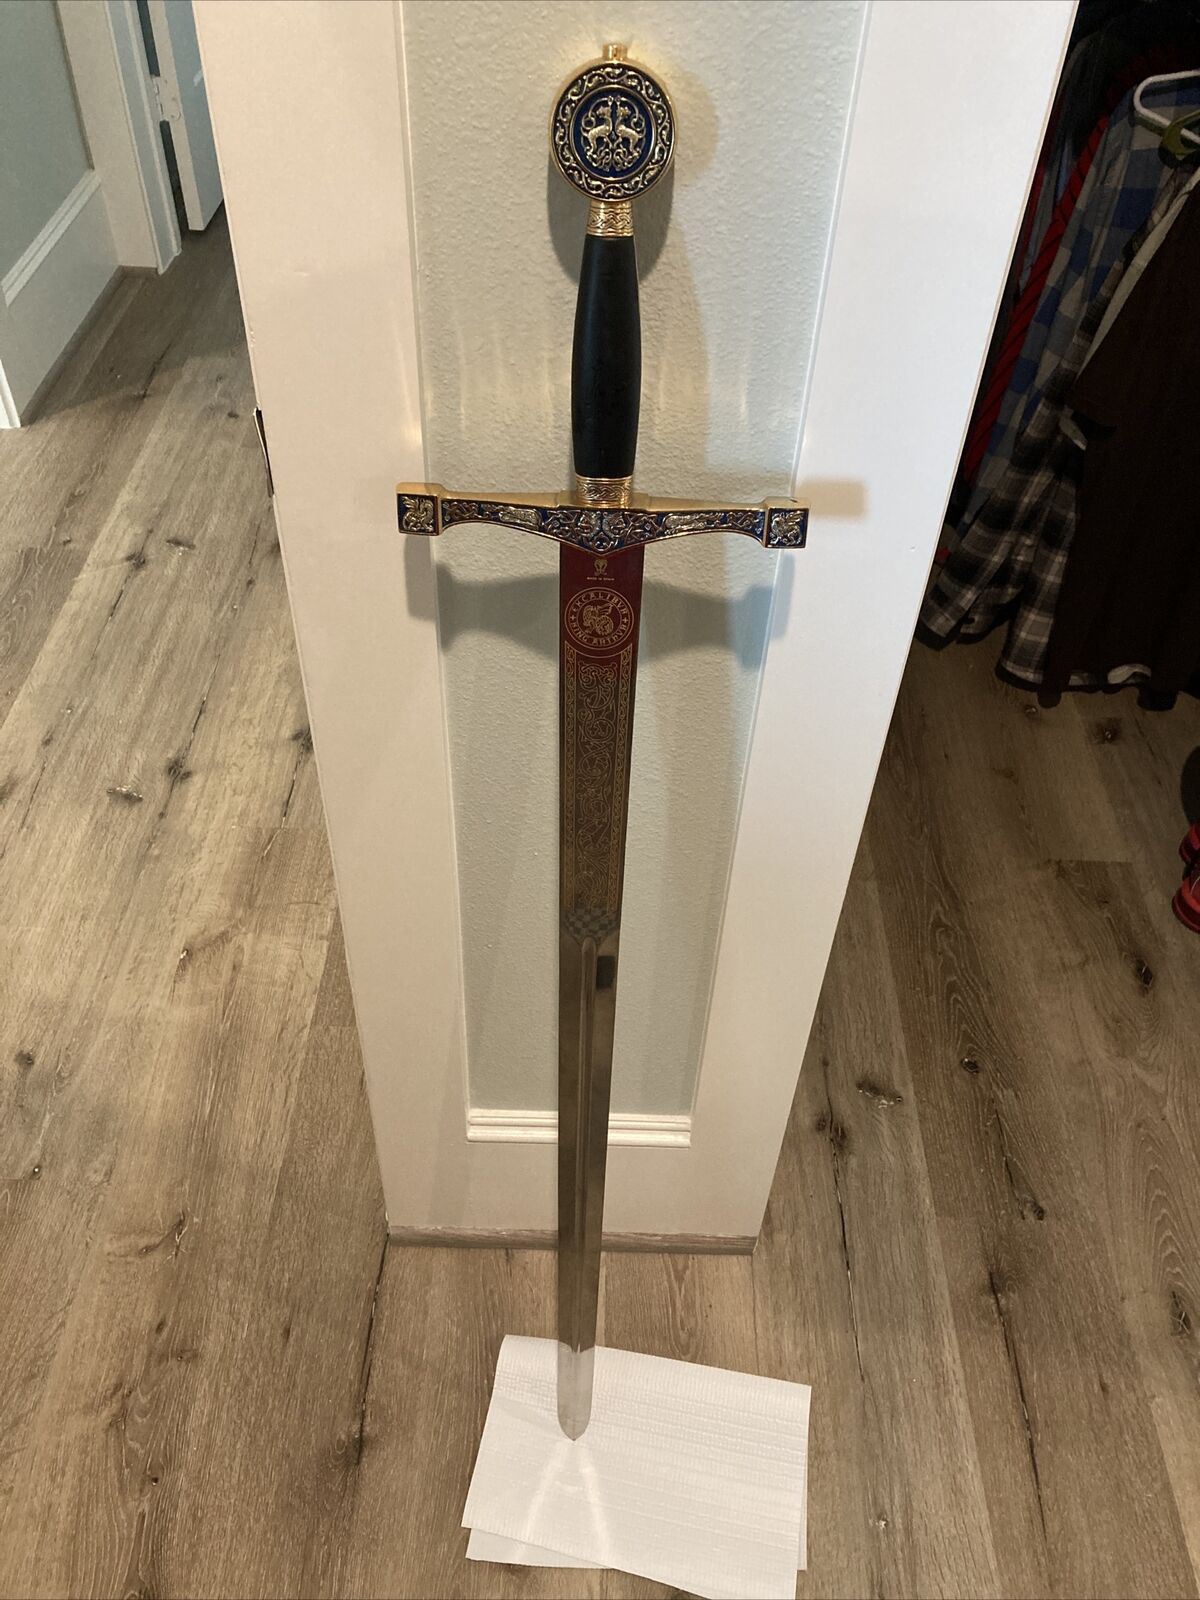 Made In Spain Excalibur Sword Hand Made With Care To Detail